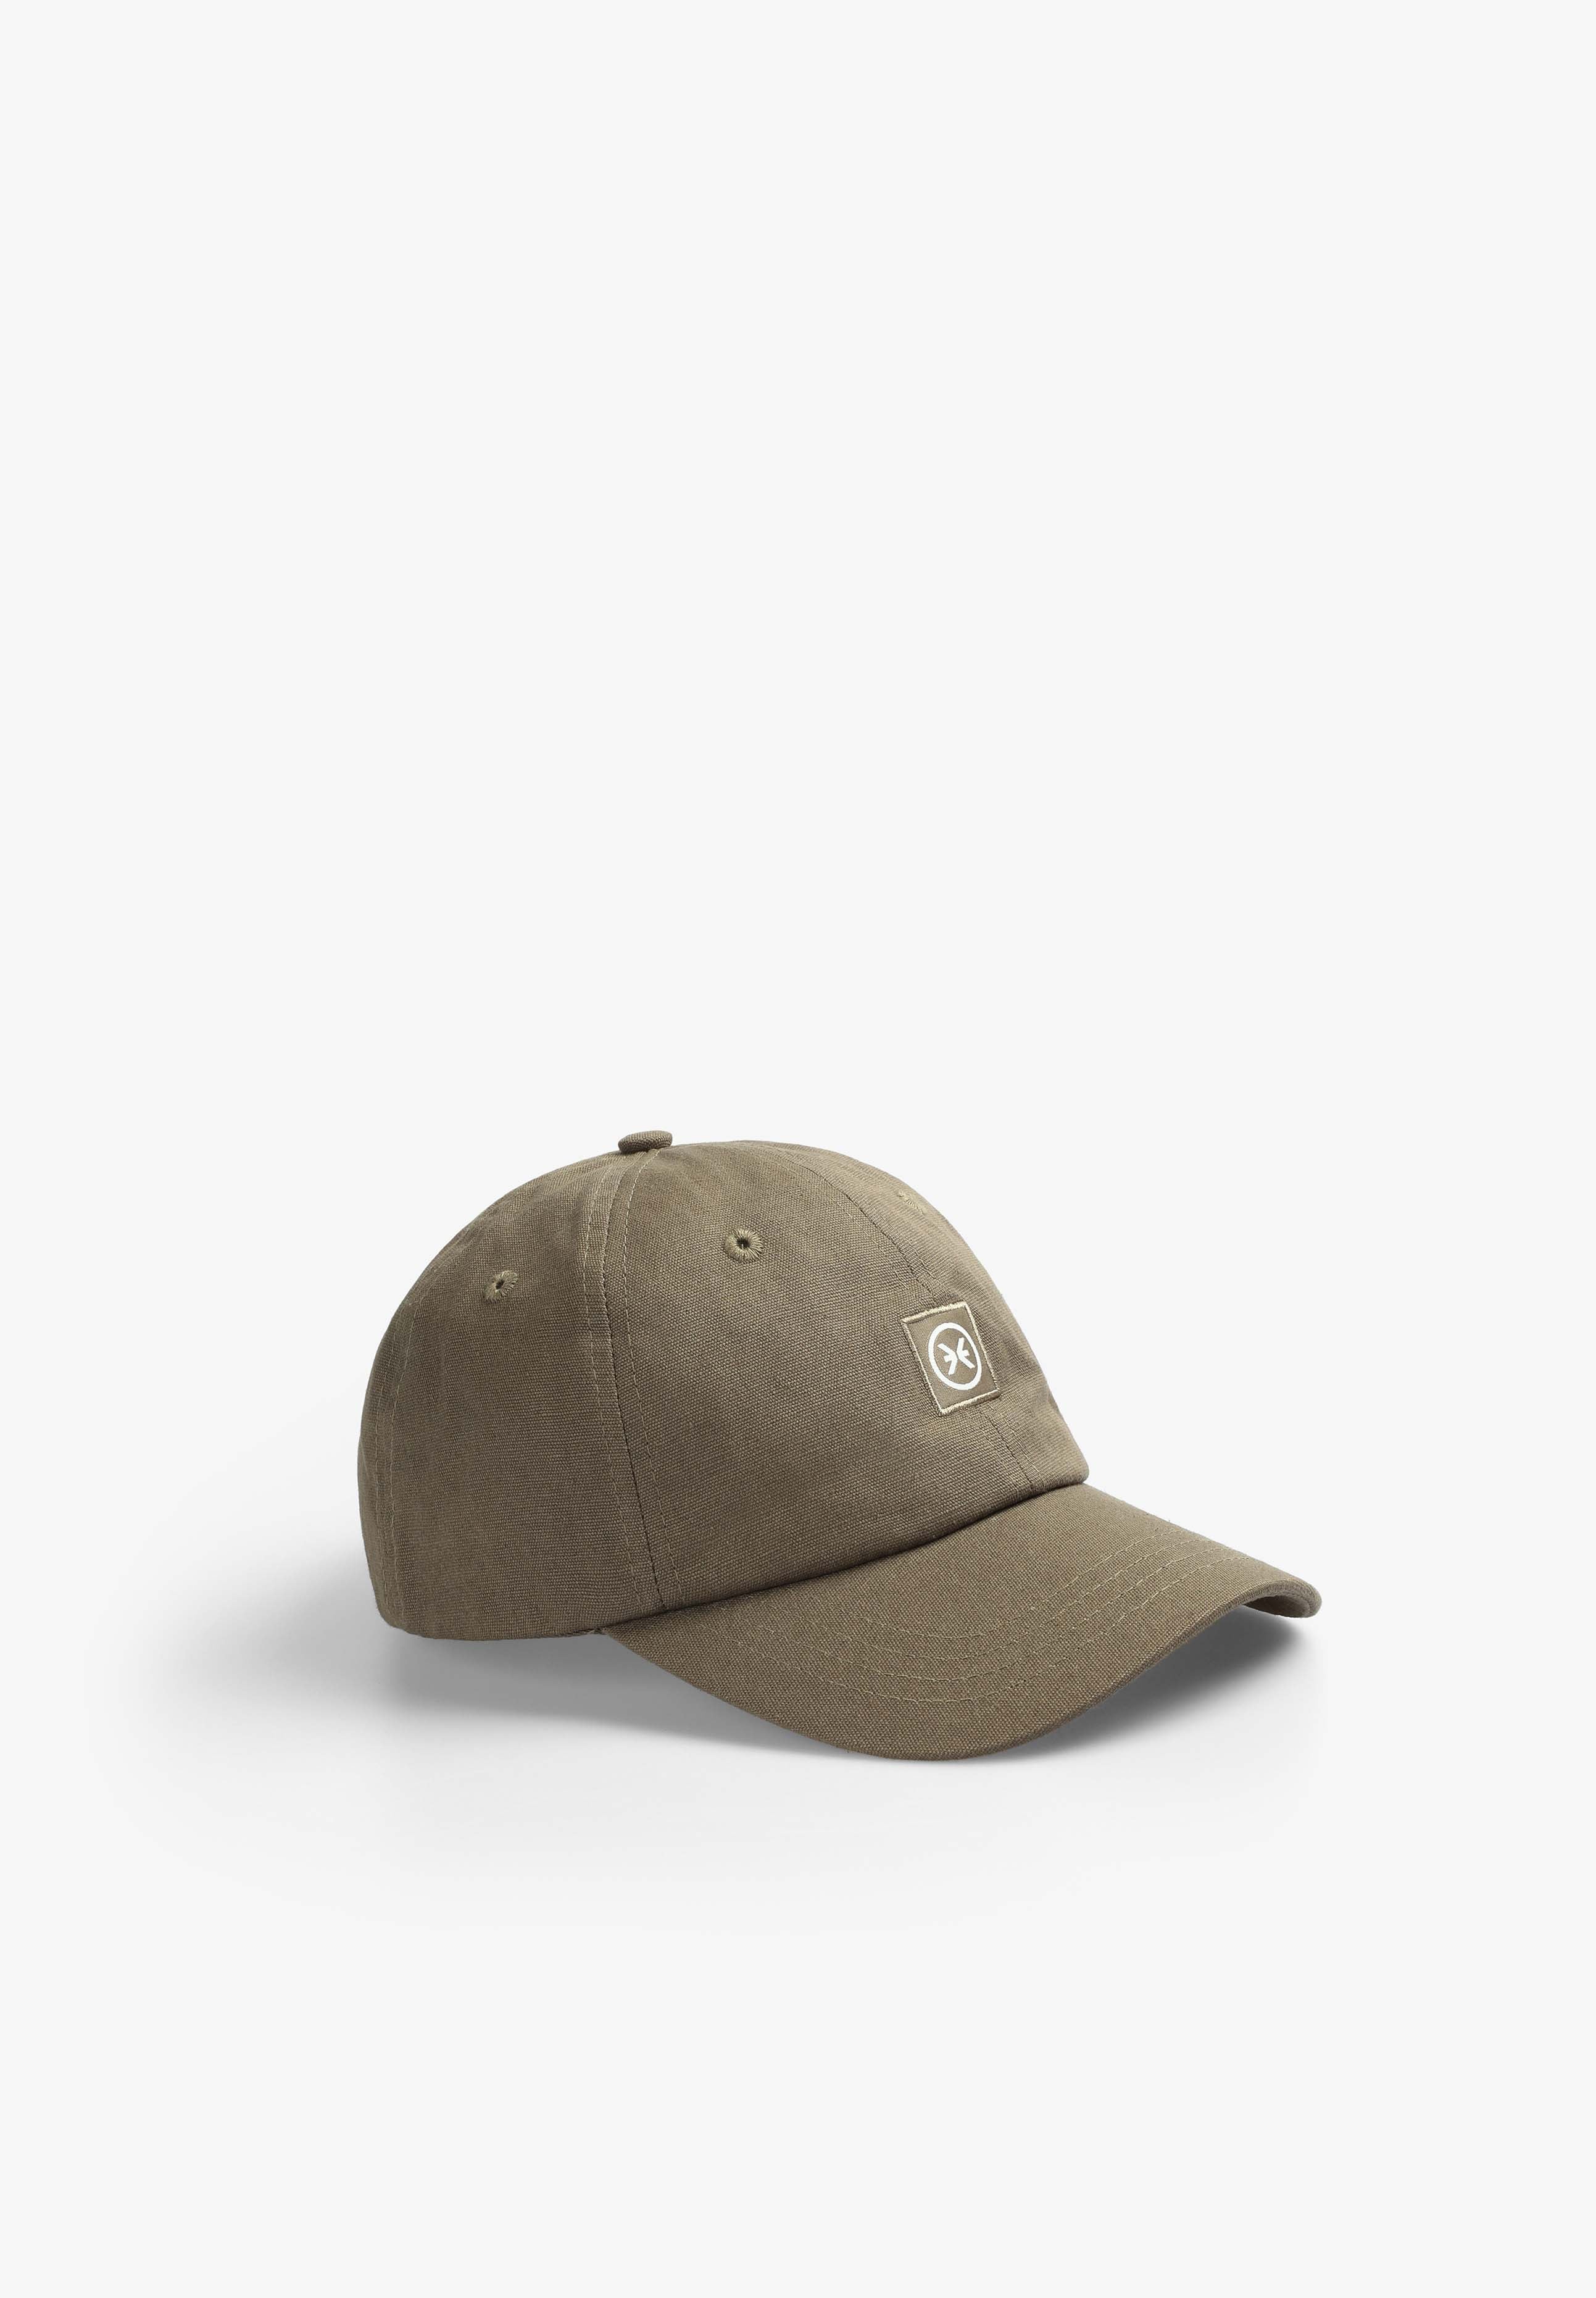 DEEPLY | GORRA LAY DAY